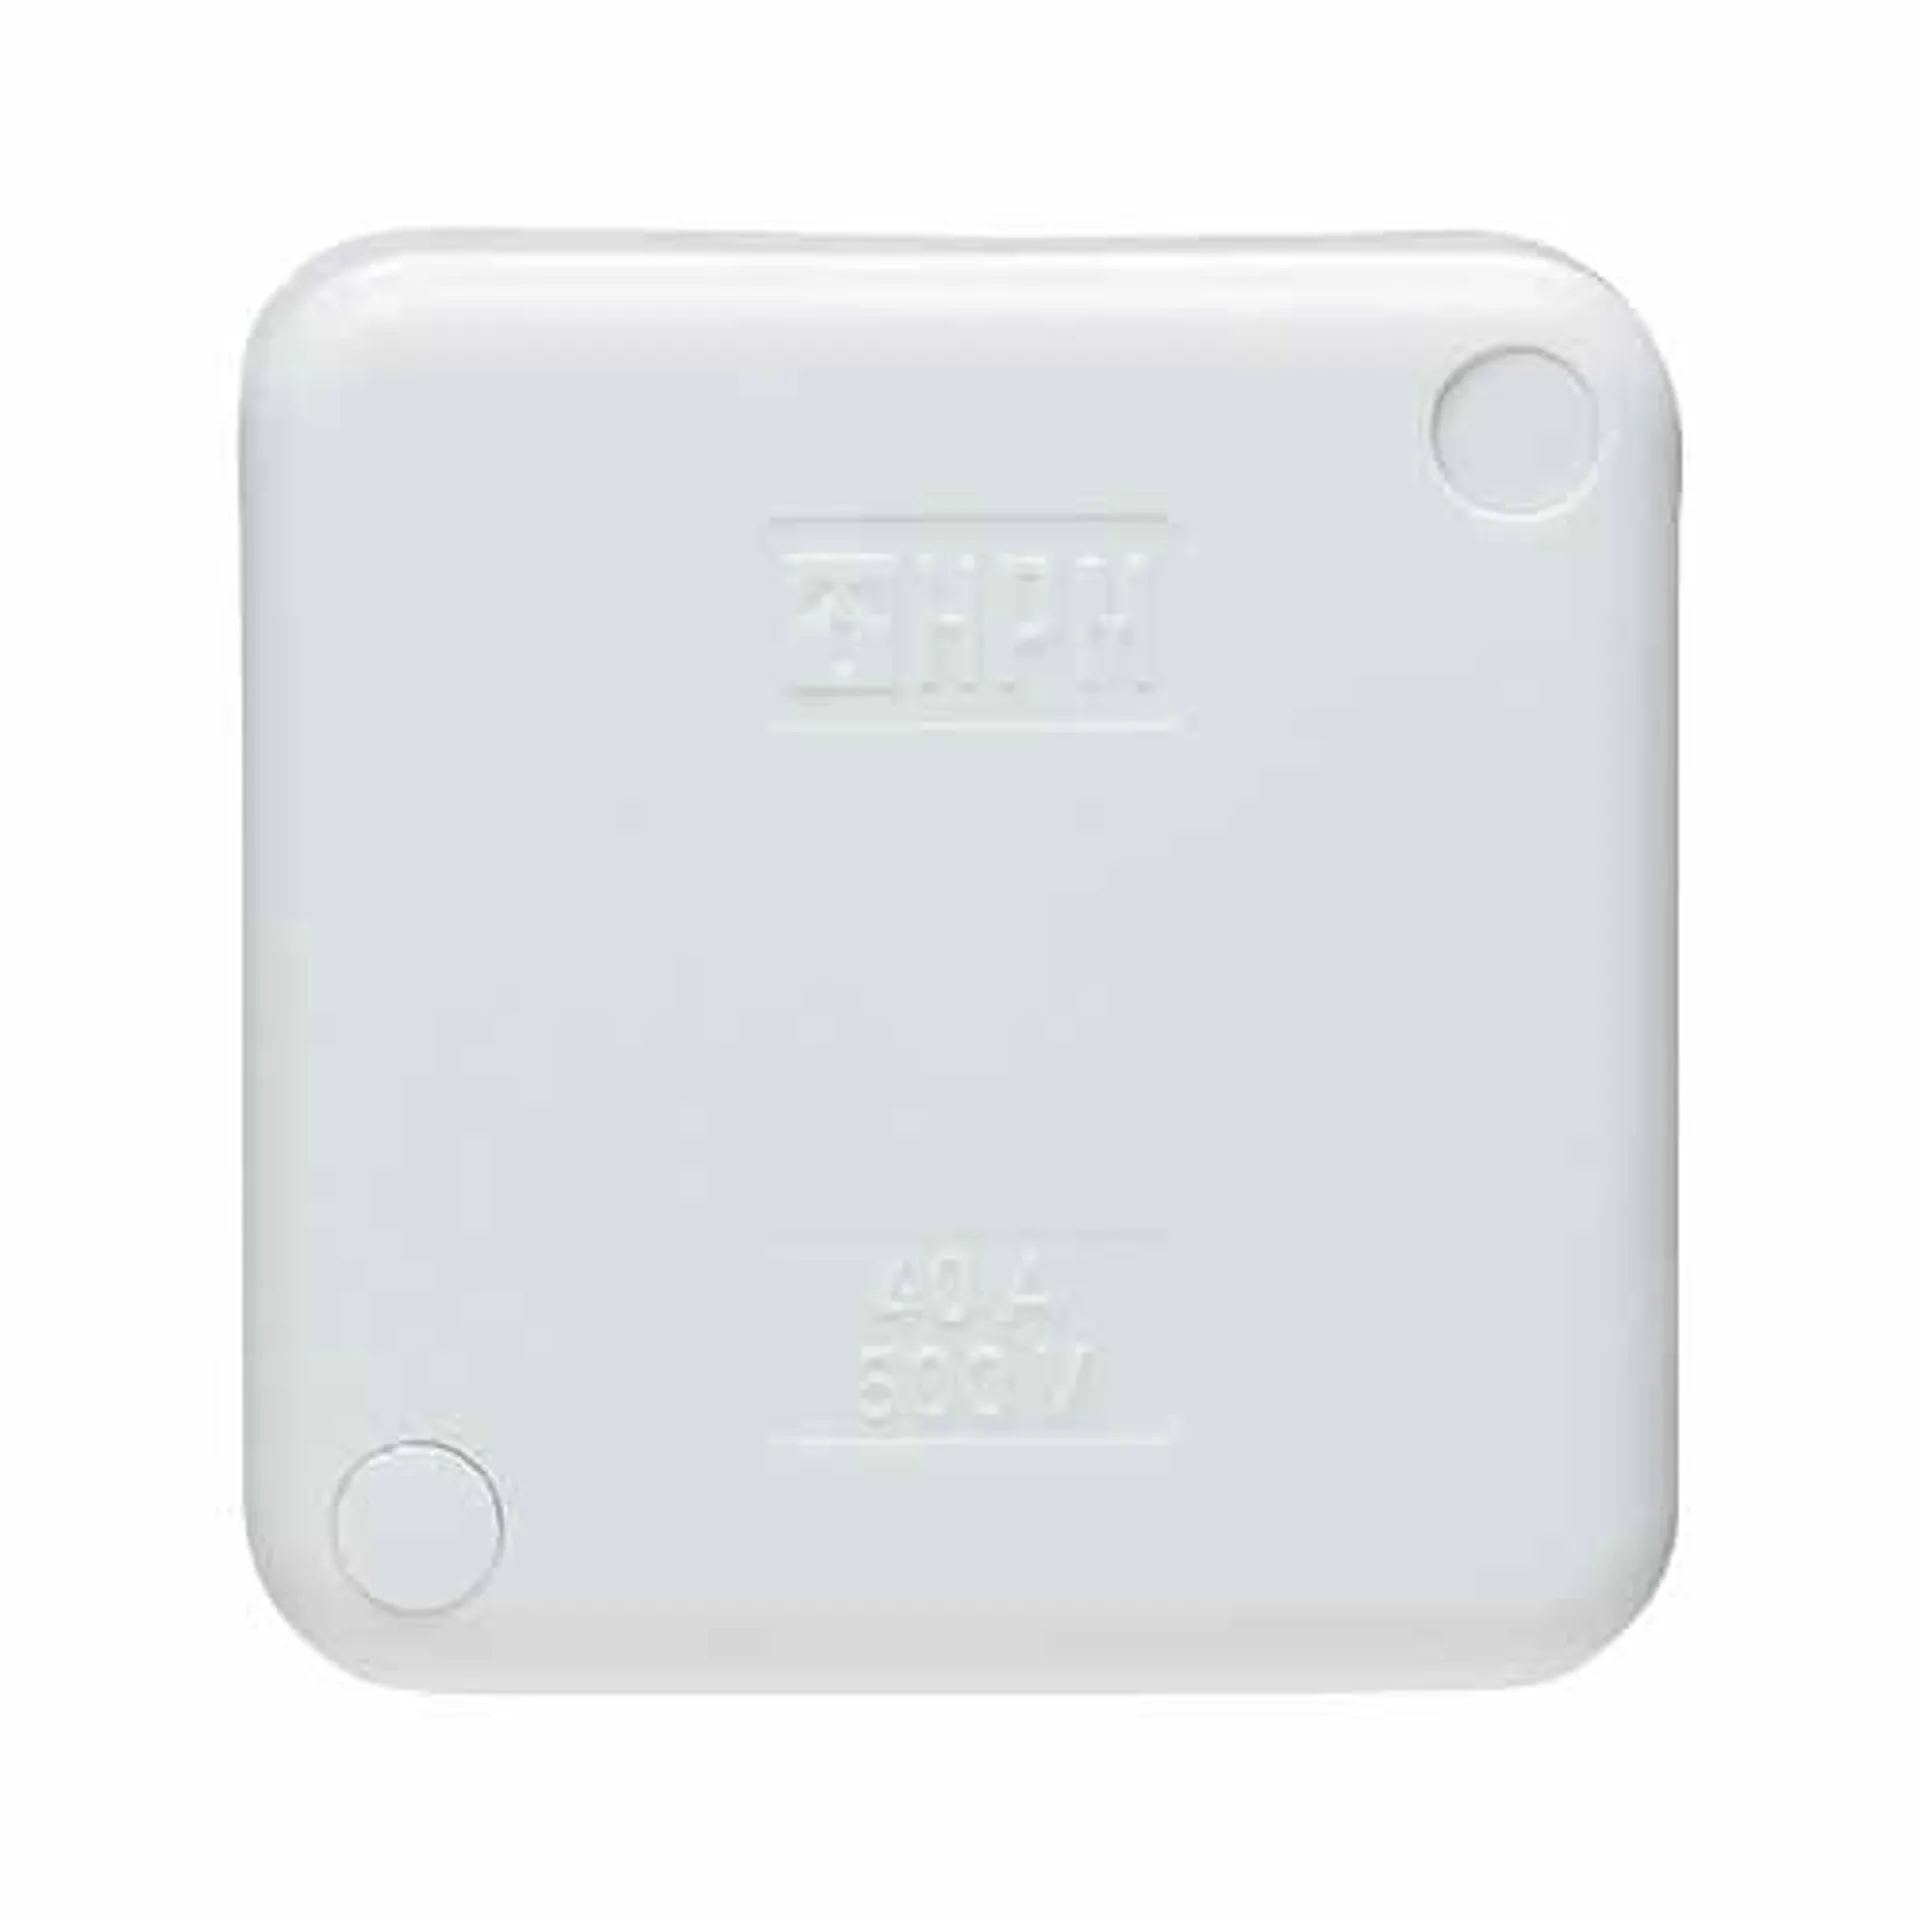 HPM 4 CONNECTOR JUNCTION BOX 68mm x 68mm x 38mm White